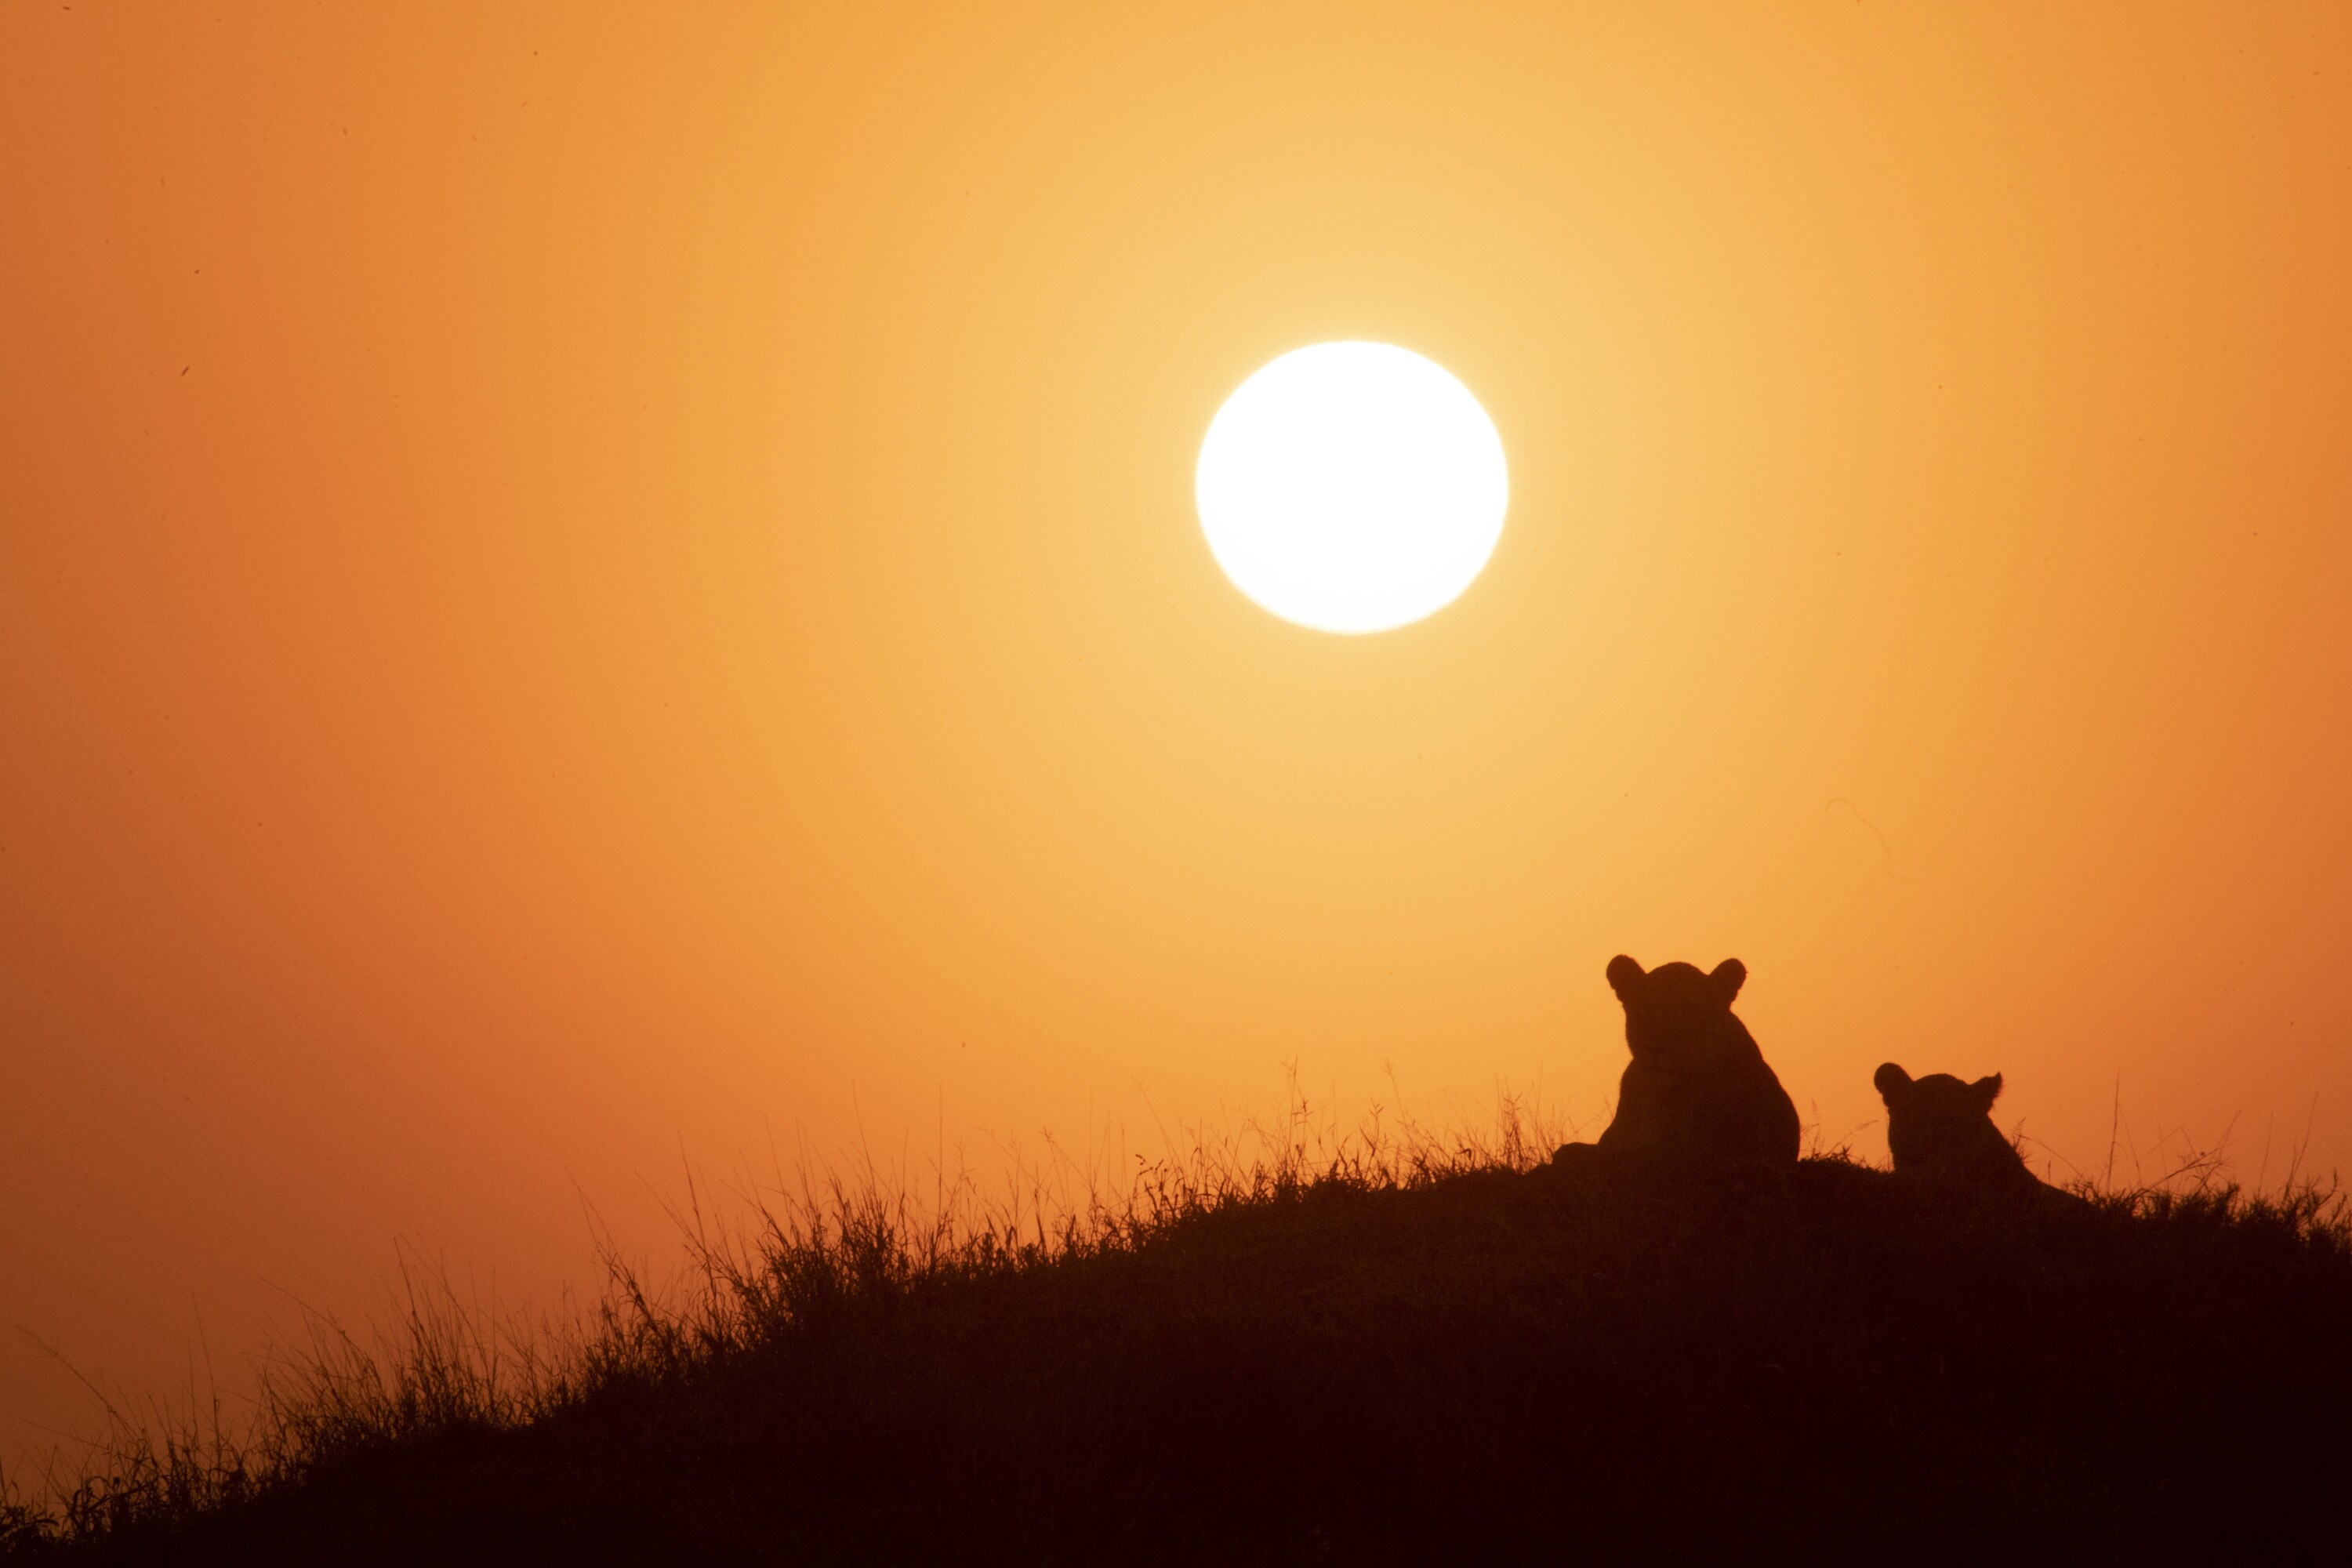 Issa and Nuru relax on a hill at sundown. (National Geographic for Disney+/Russell MacLaughlin)